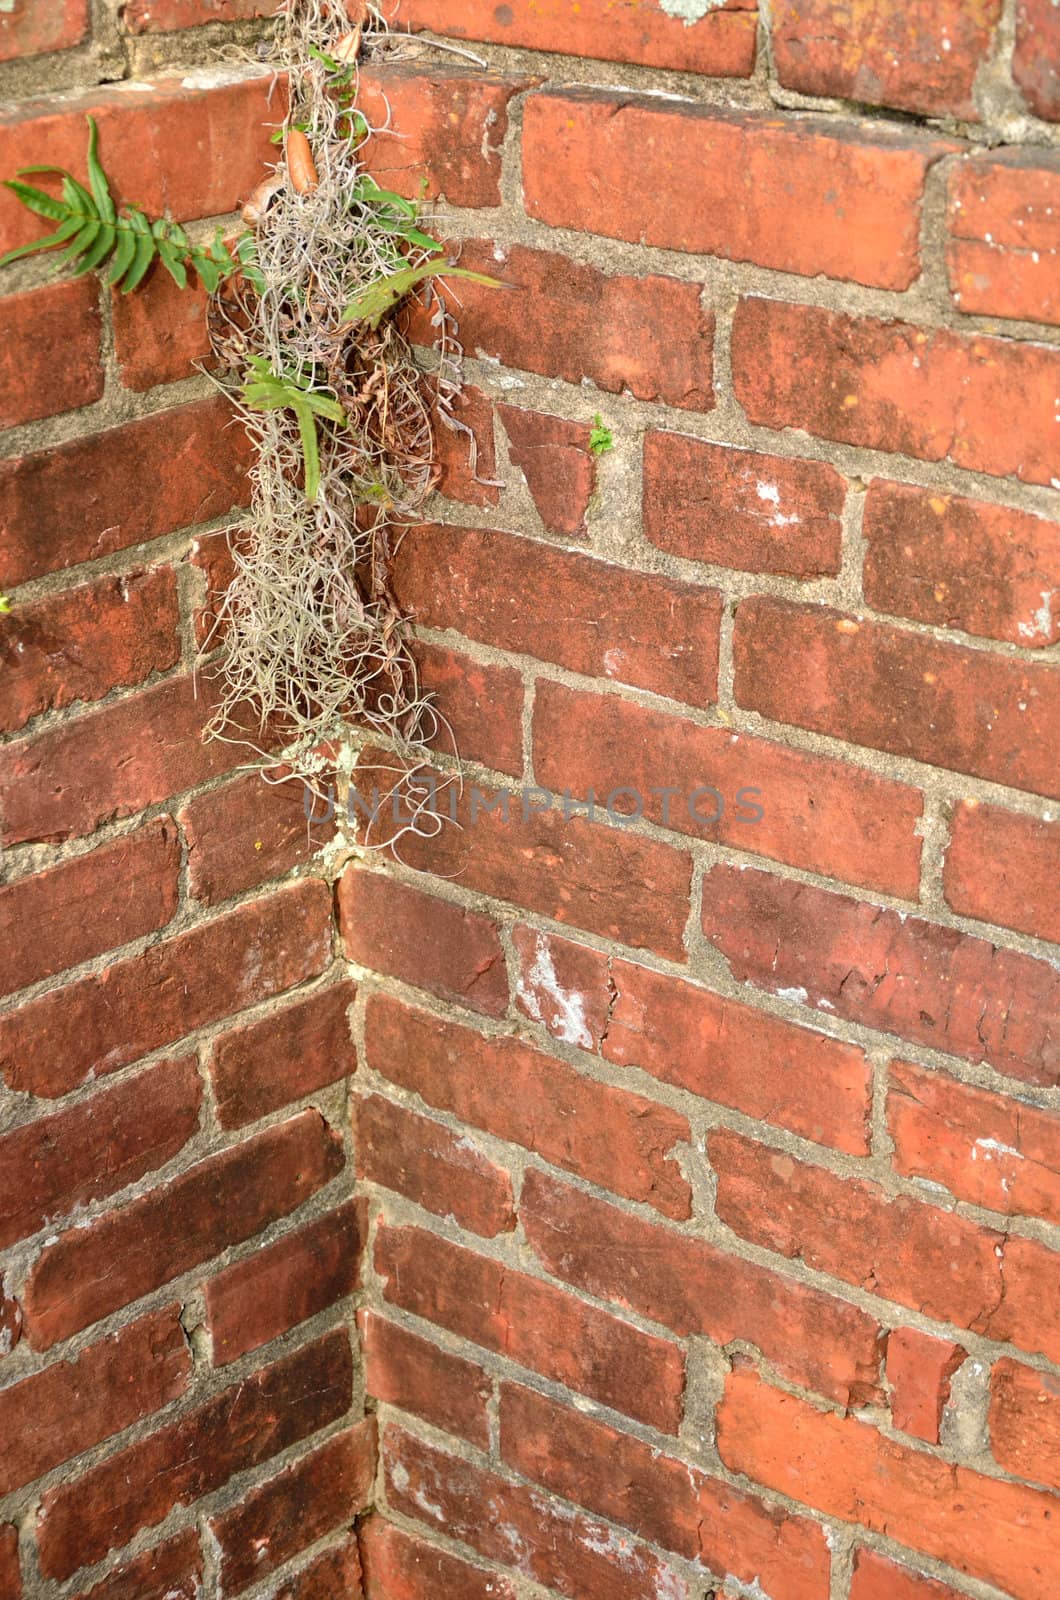 Old brick fence offers growing spot in the corner for Resurrection Fern and Spanish Moss